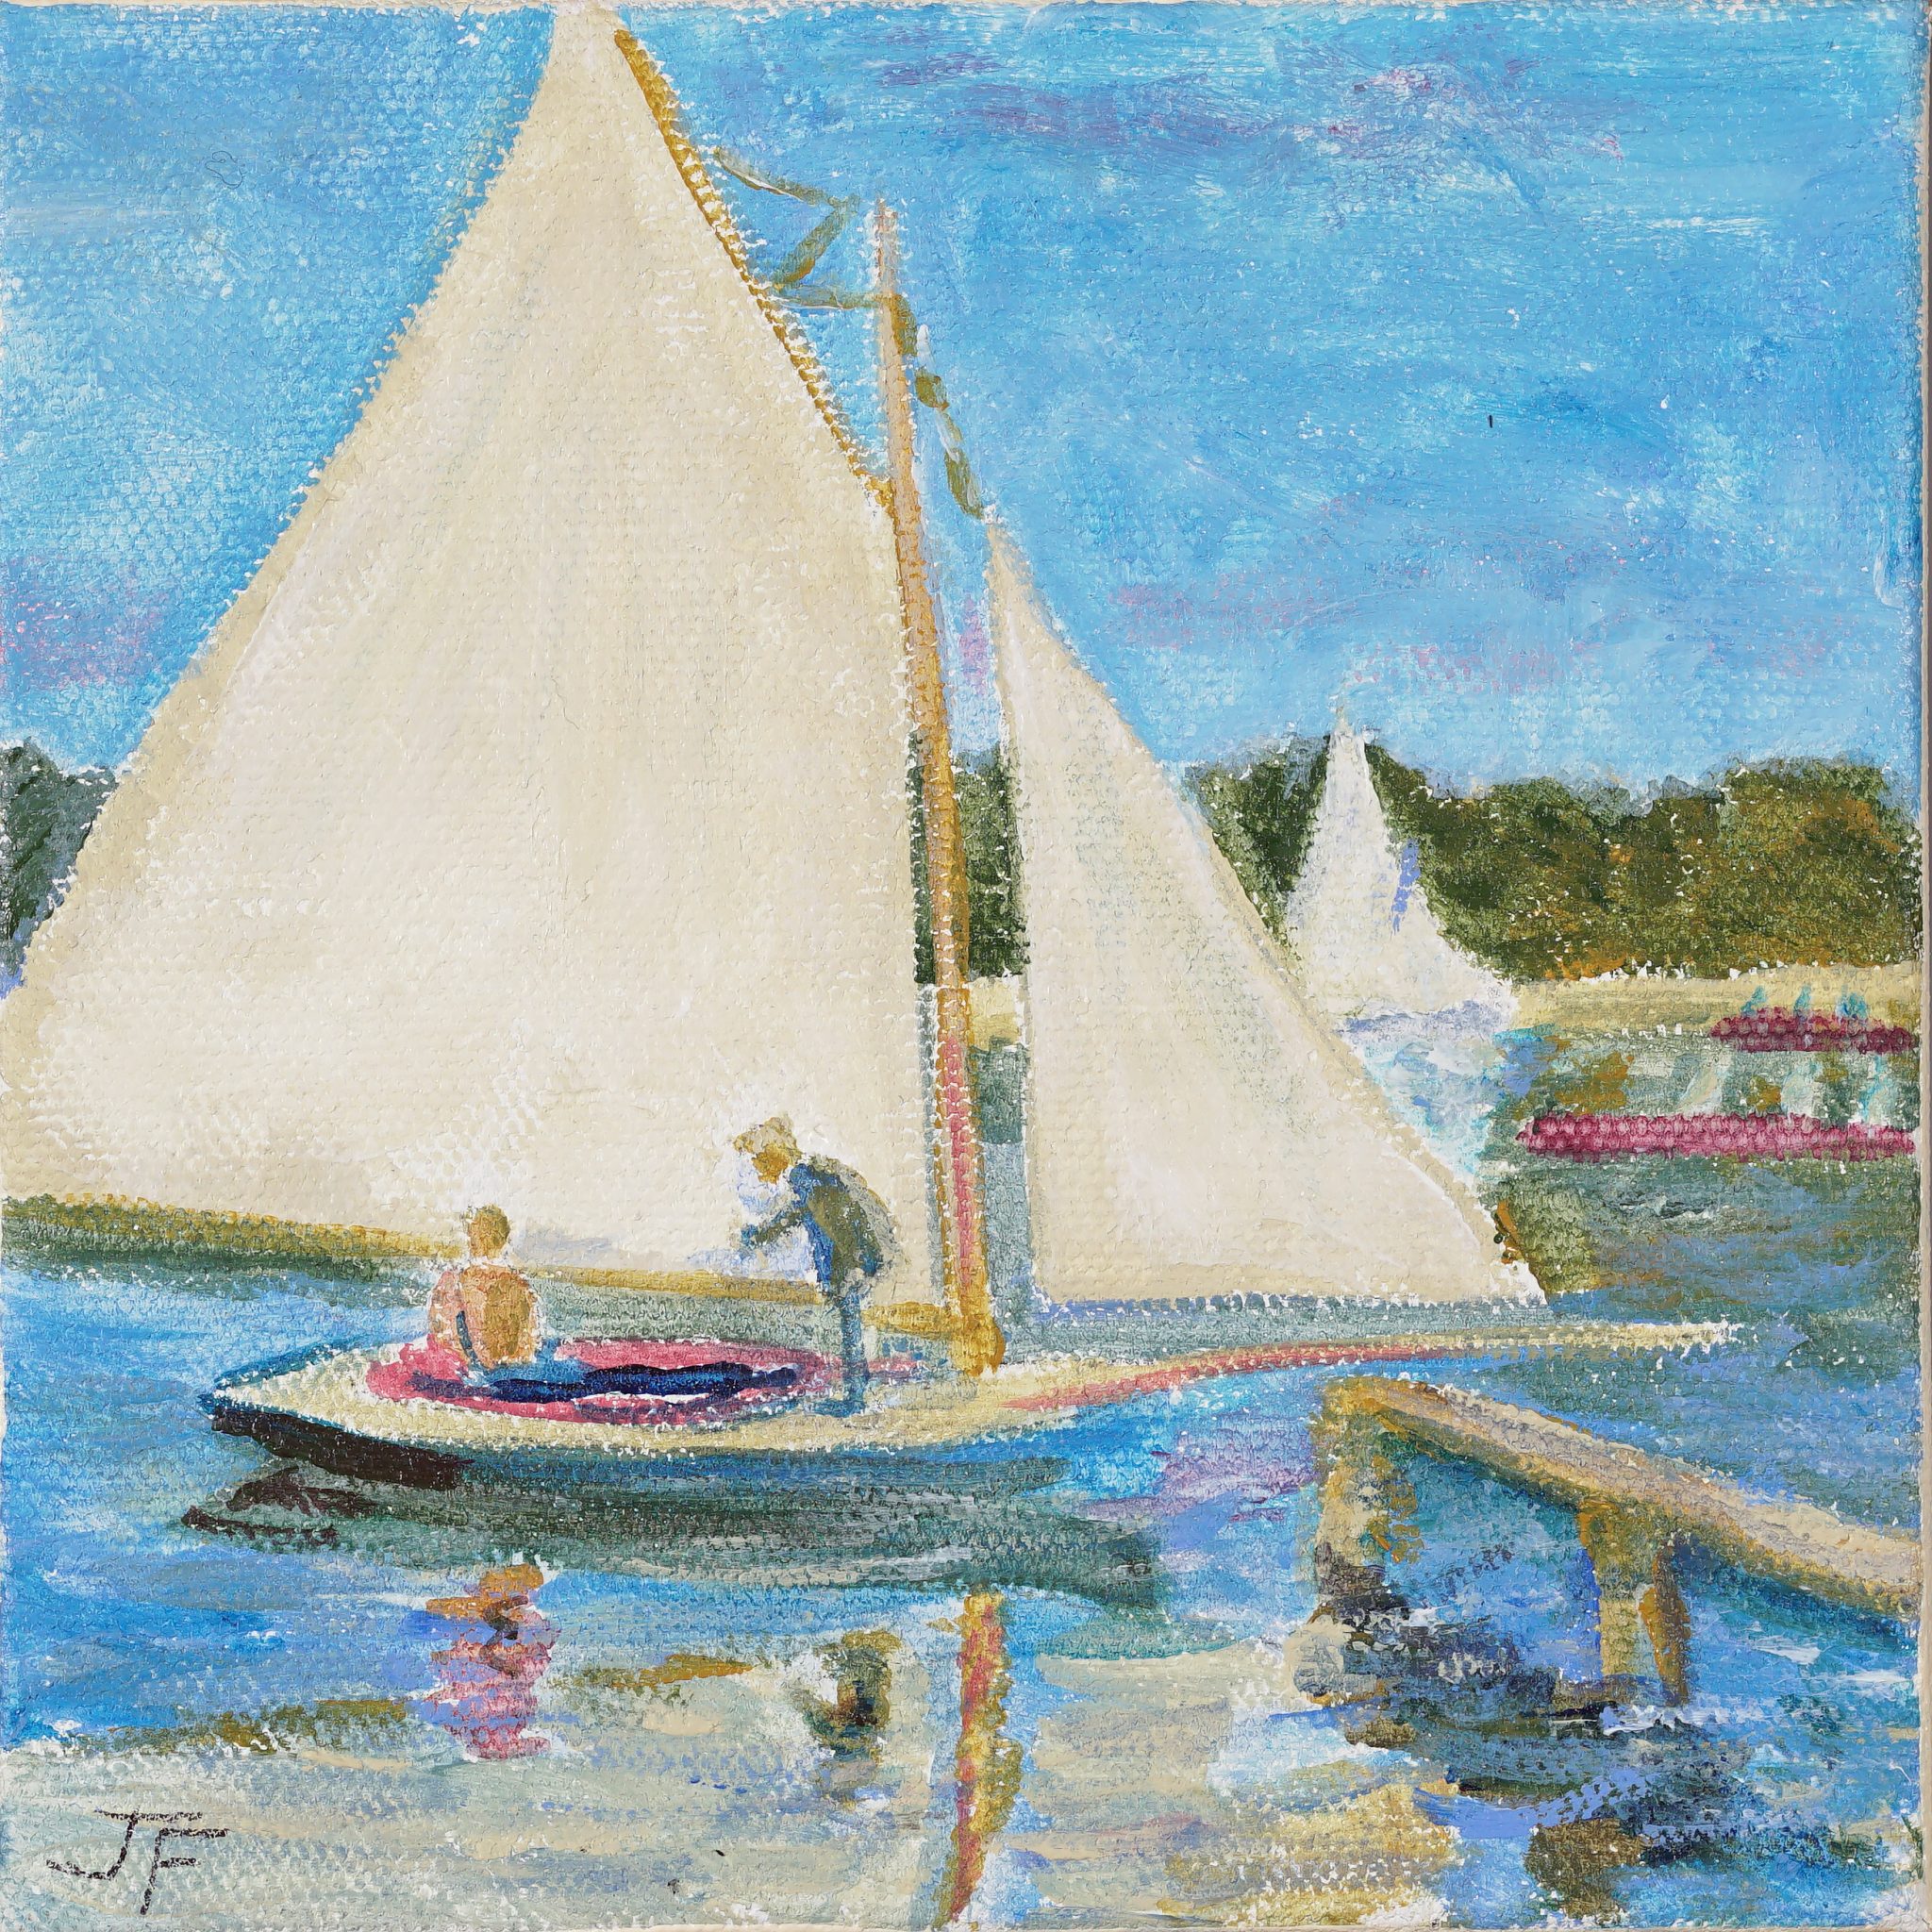 Jeanette Foreman, Sailing at Argenteuil, like Monet